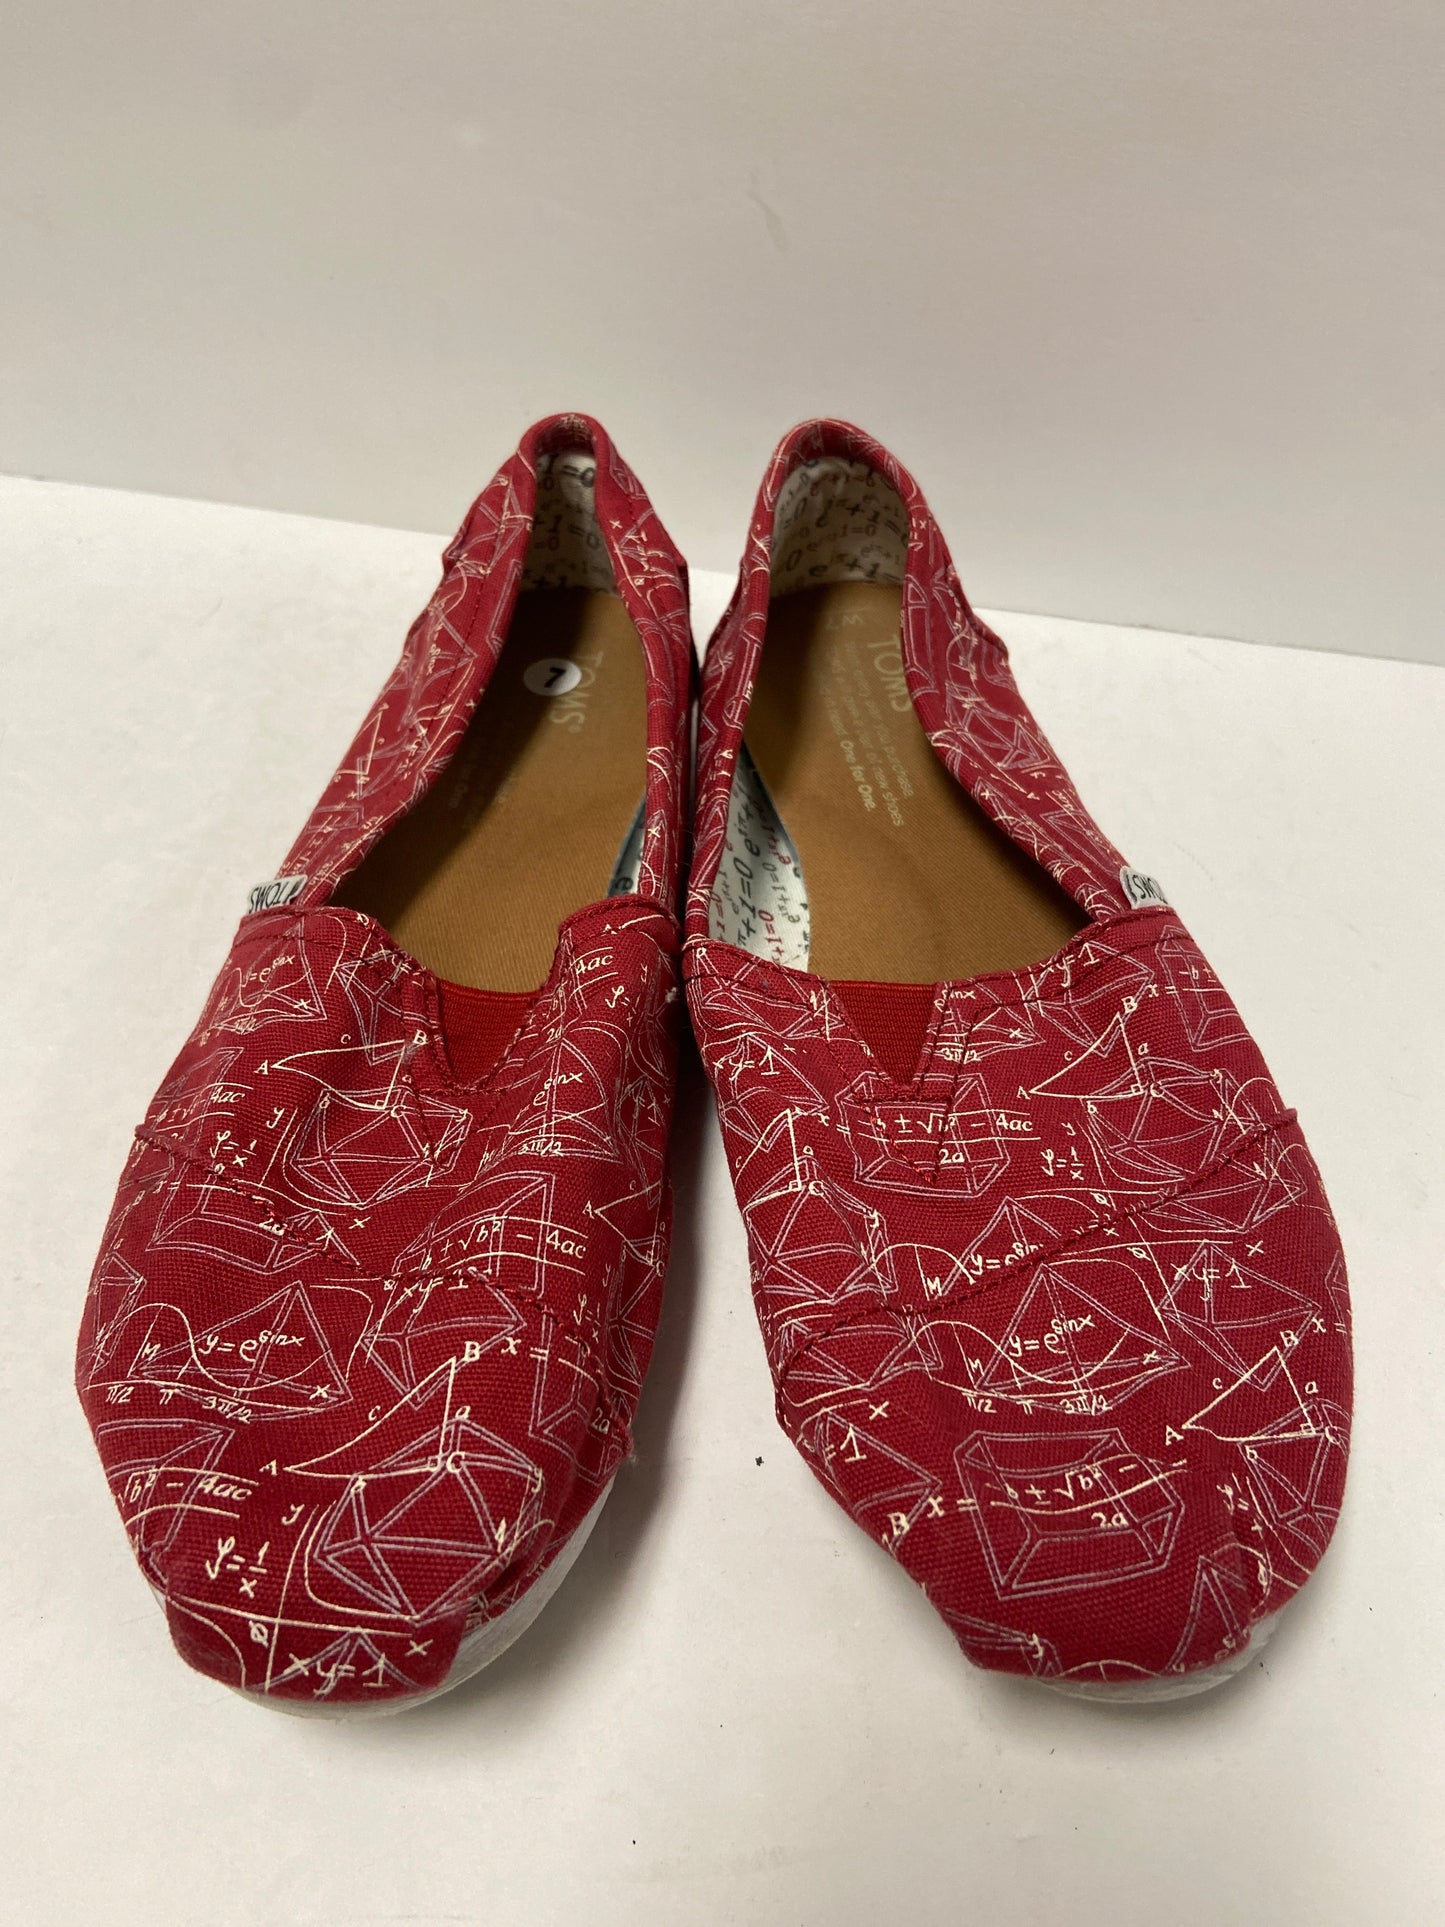 Red & White Shoes Flats Toms, Size 7